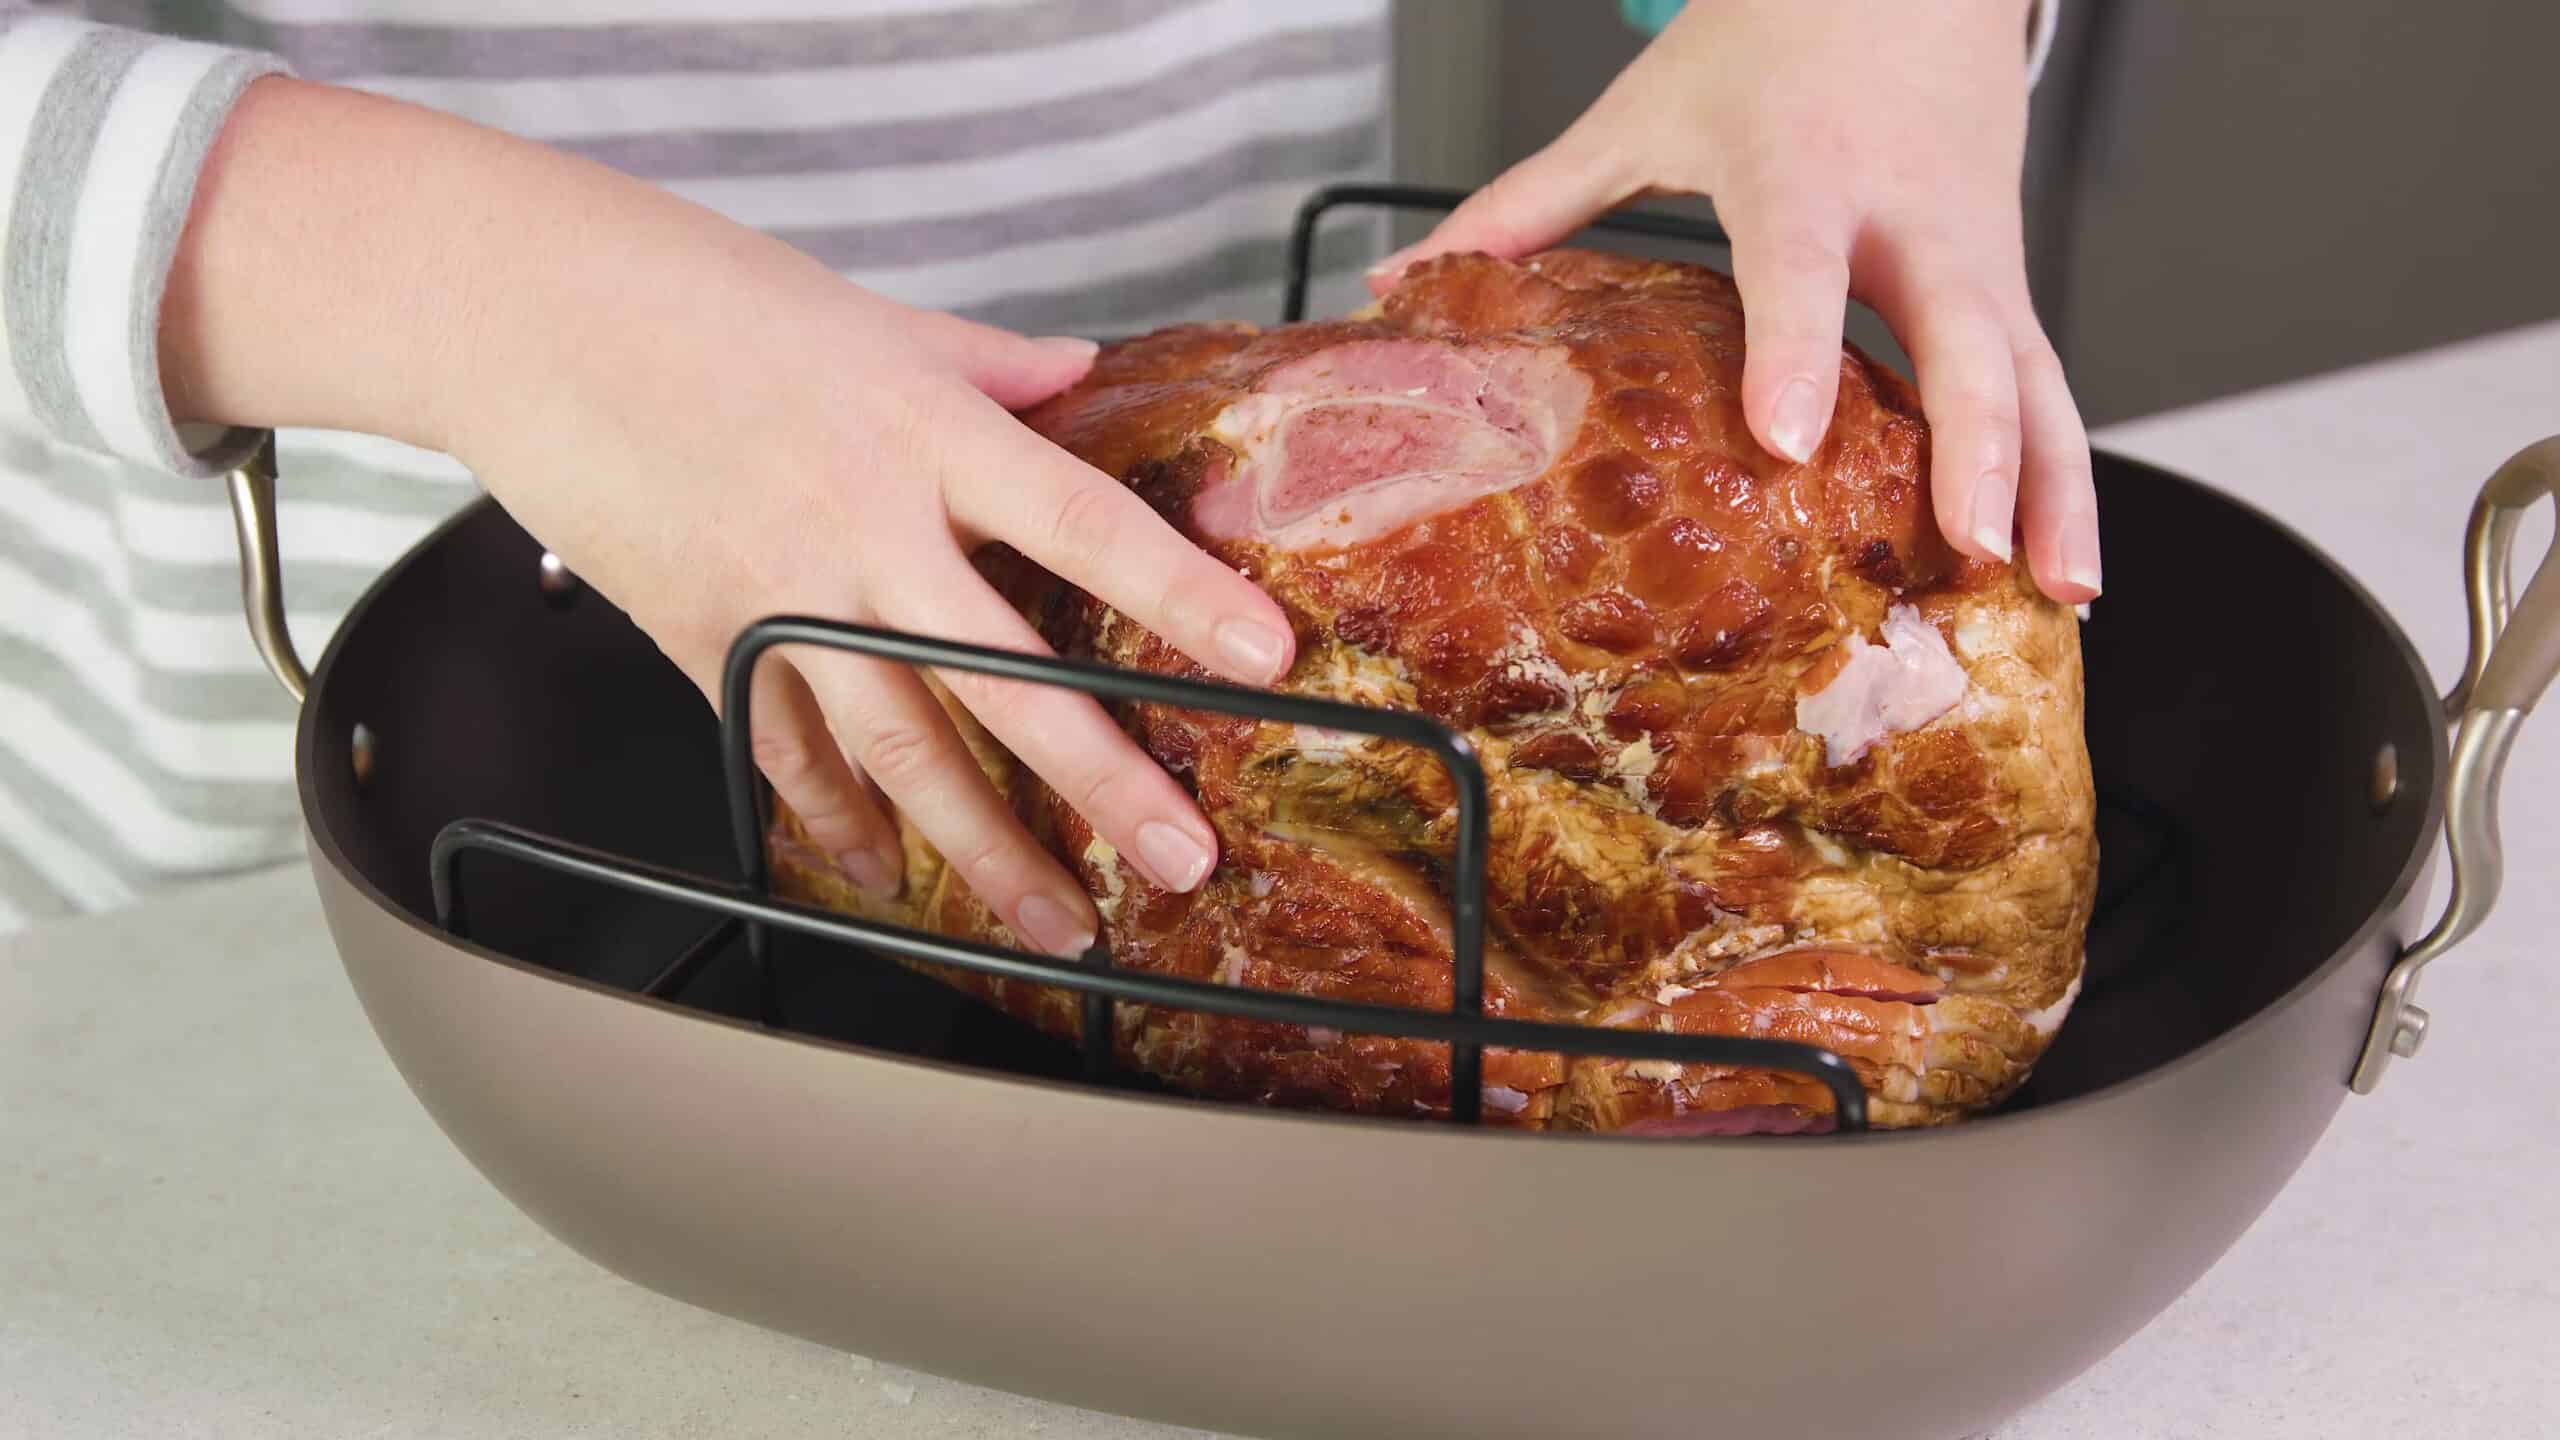 Angled view of stainless steel roasting pan with metal rack to lift the ham that is inside above the bottom of the pan.